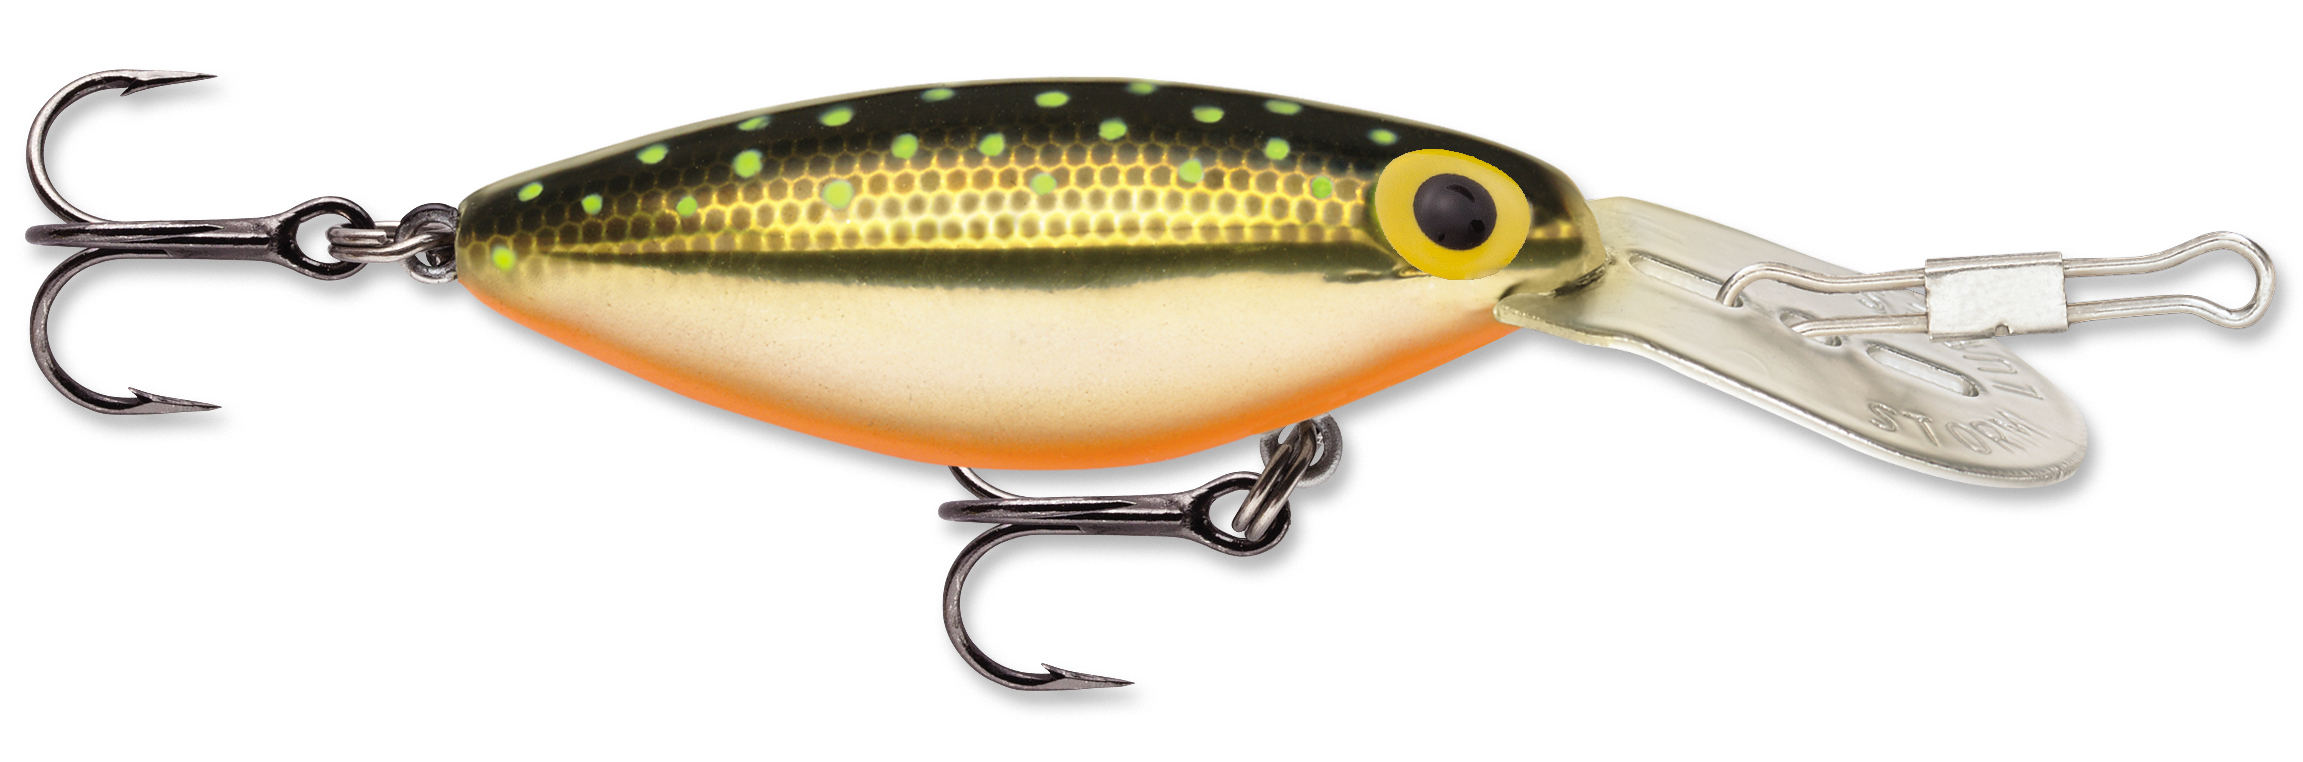 Storm Original Hot 'N Tot #05 - Metallic Gold with Chartreuse Specks -  Precision Fishing